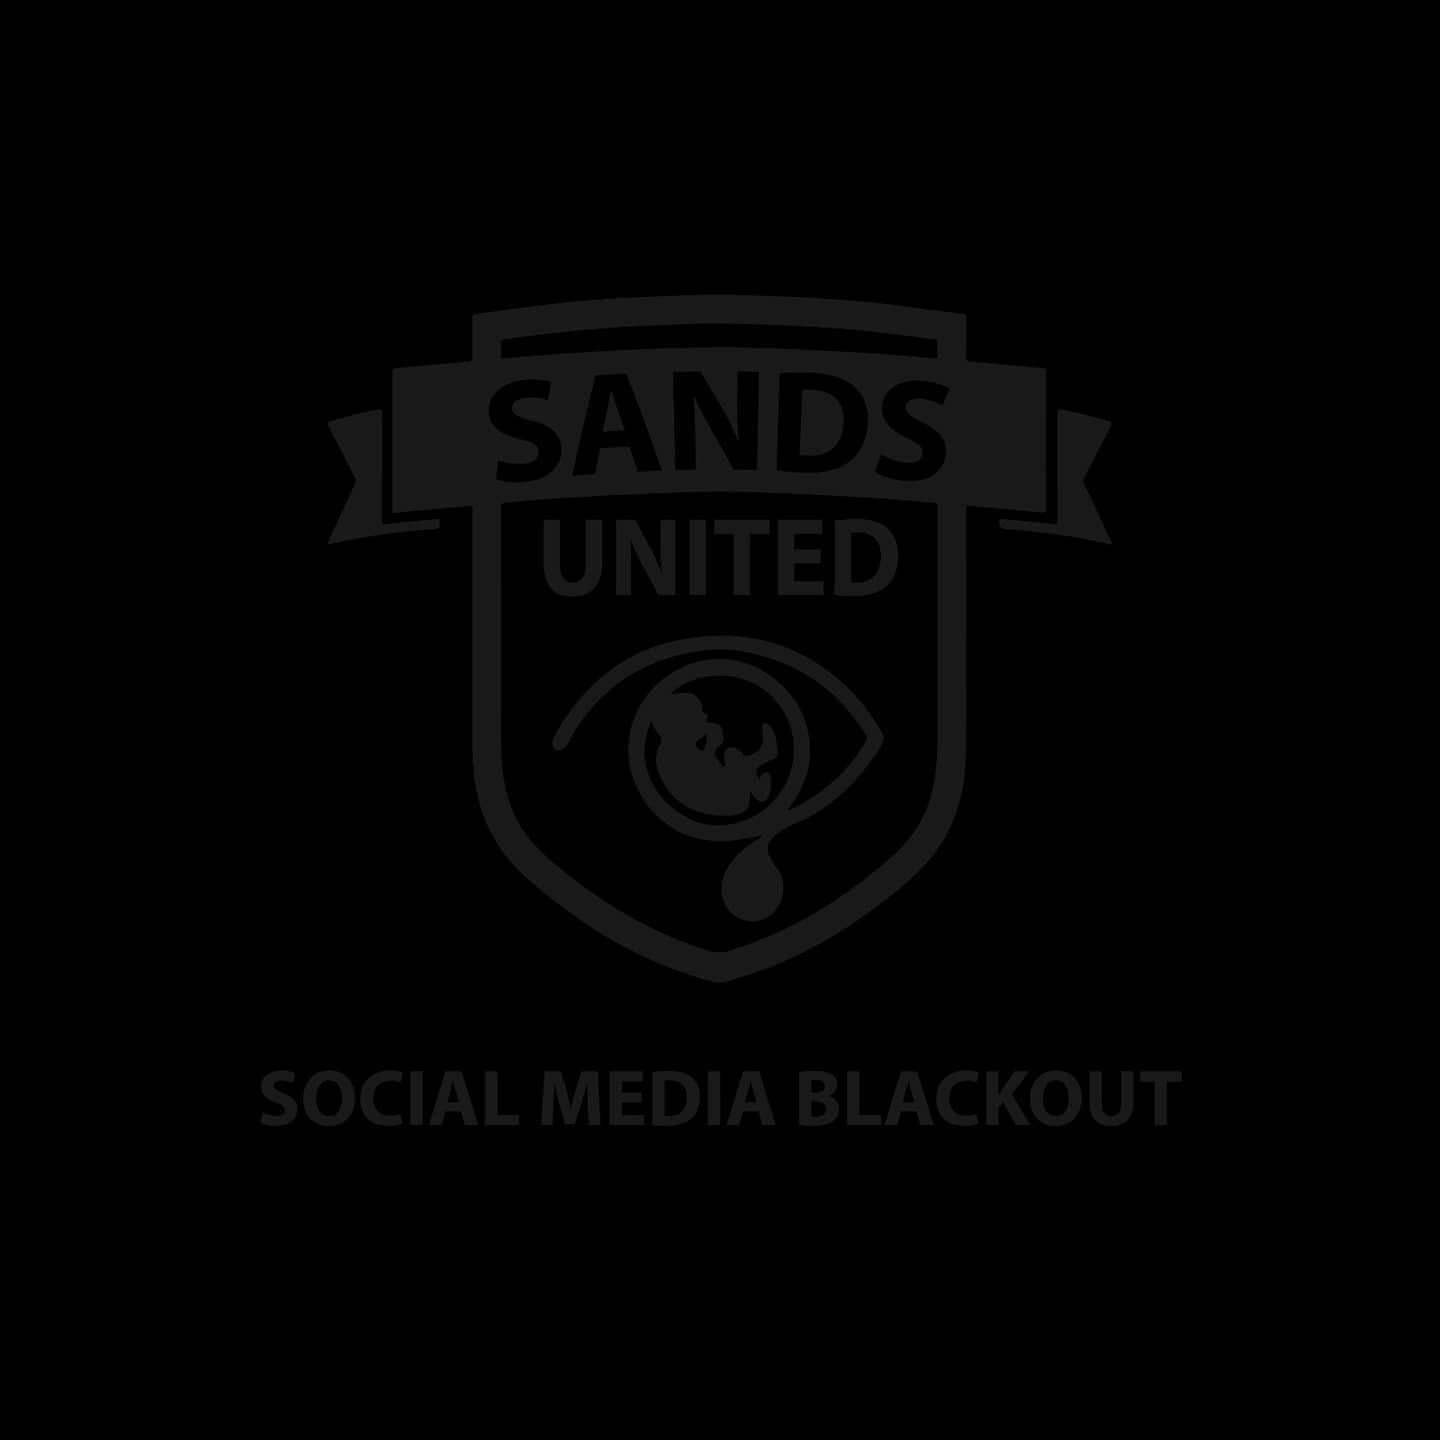 As of tomorrow we are joining the @thefootballassociation campaign and are having a social media blackout from 3.00pm tomorrow until 11.59pm Monday.

This is to show our support and stand firm with all of football, racism, sexism, homophobia any form